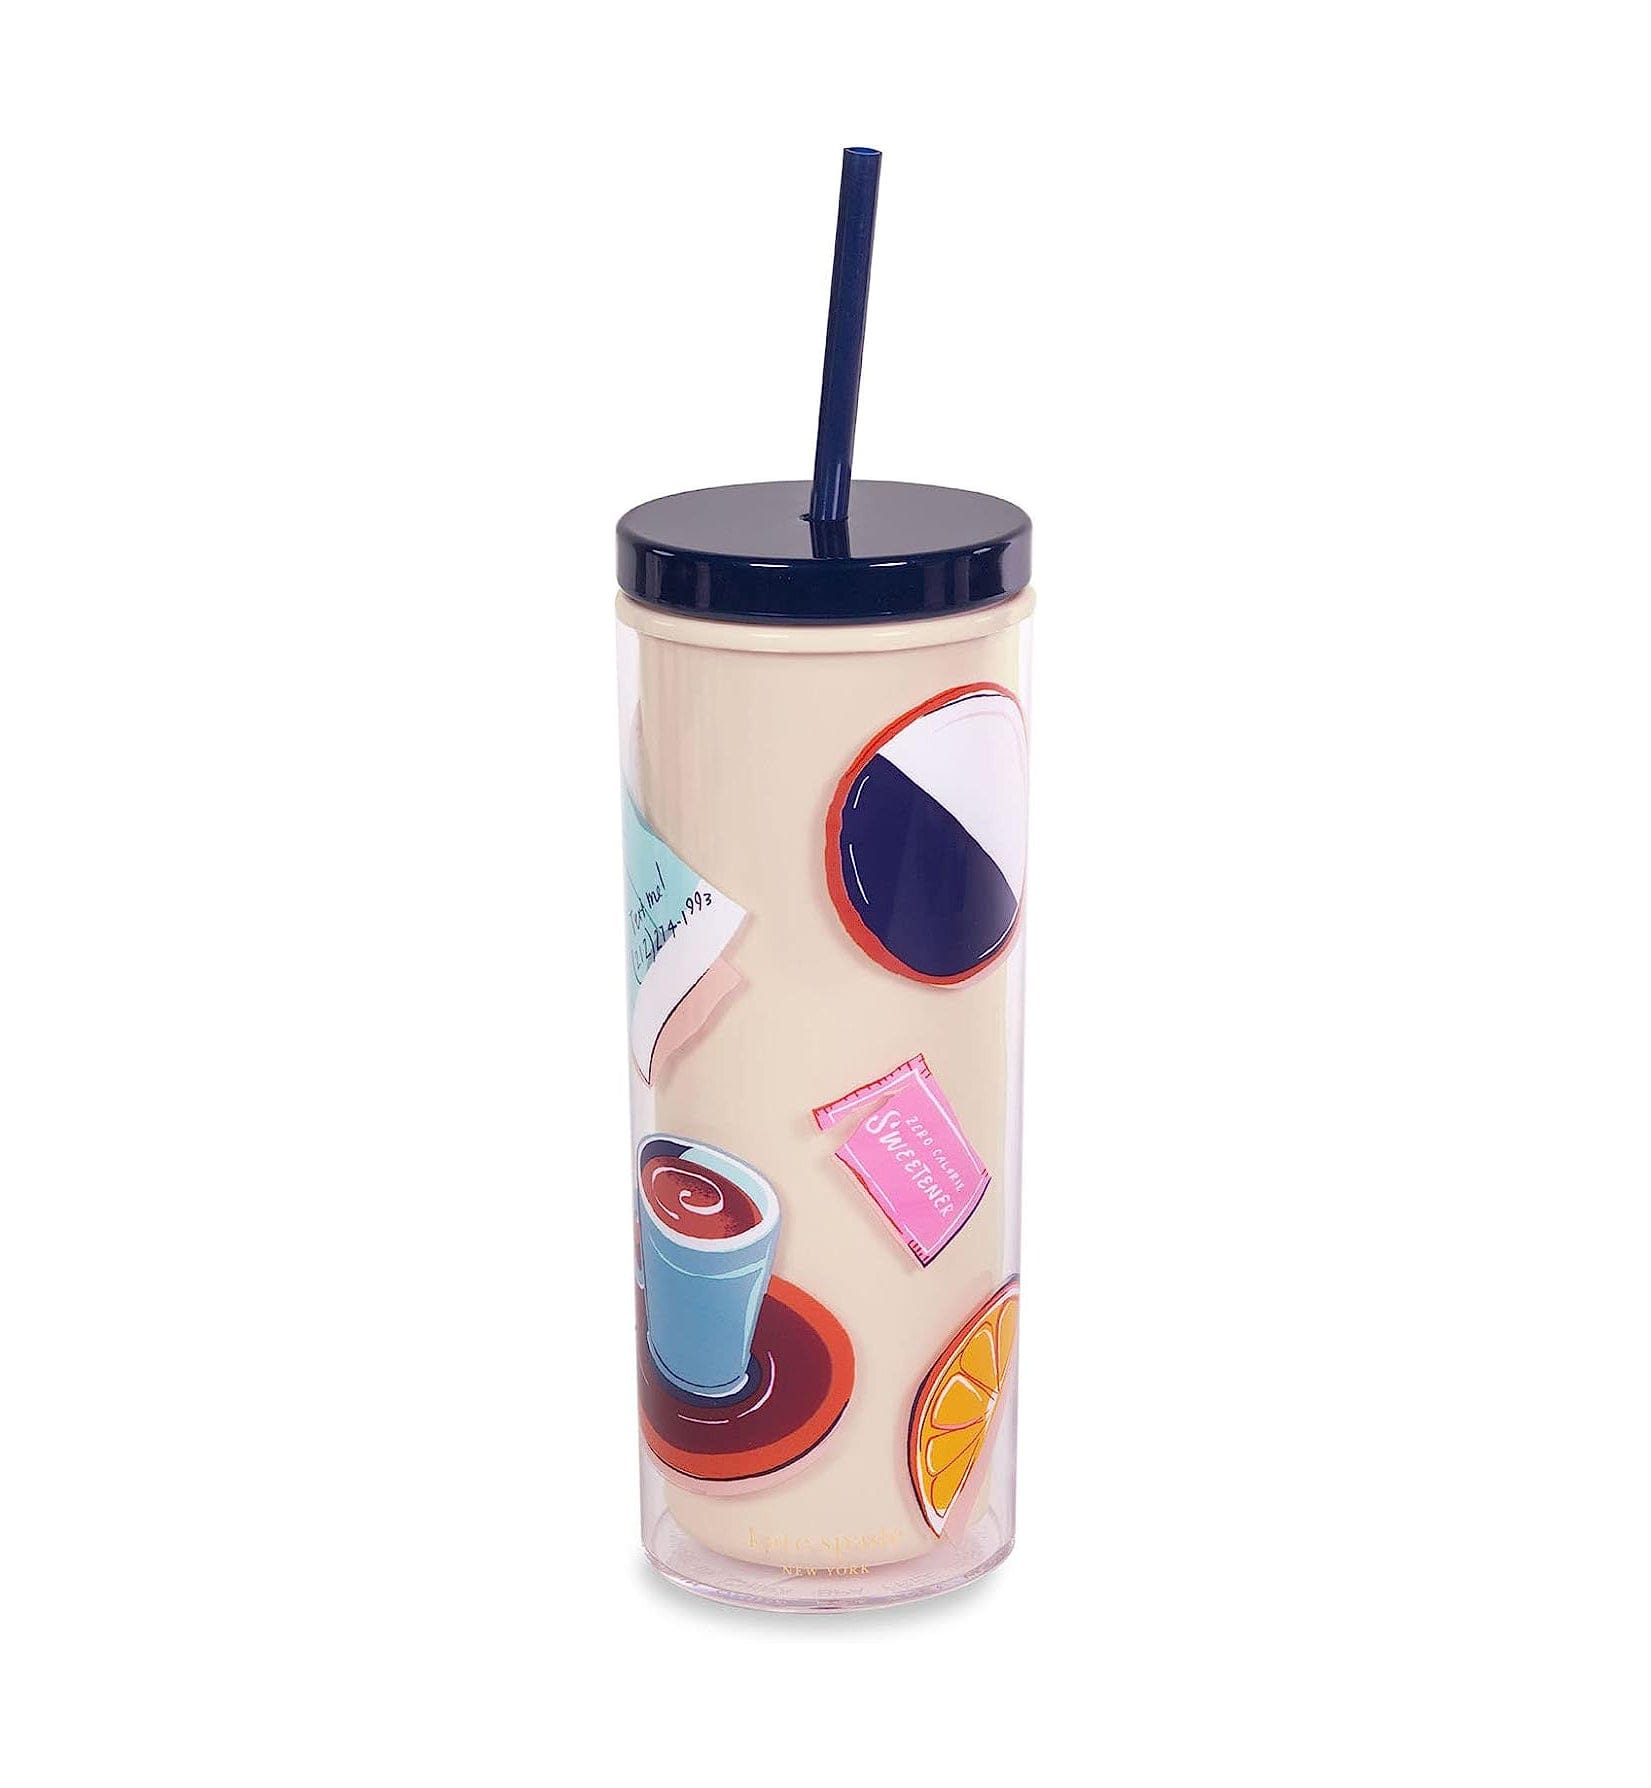 Vera Bradley Double Wall Tumbler with Straw in Fall for Peanuts